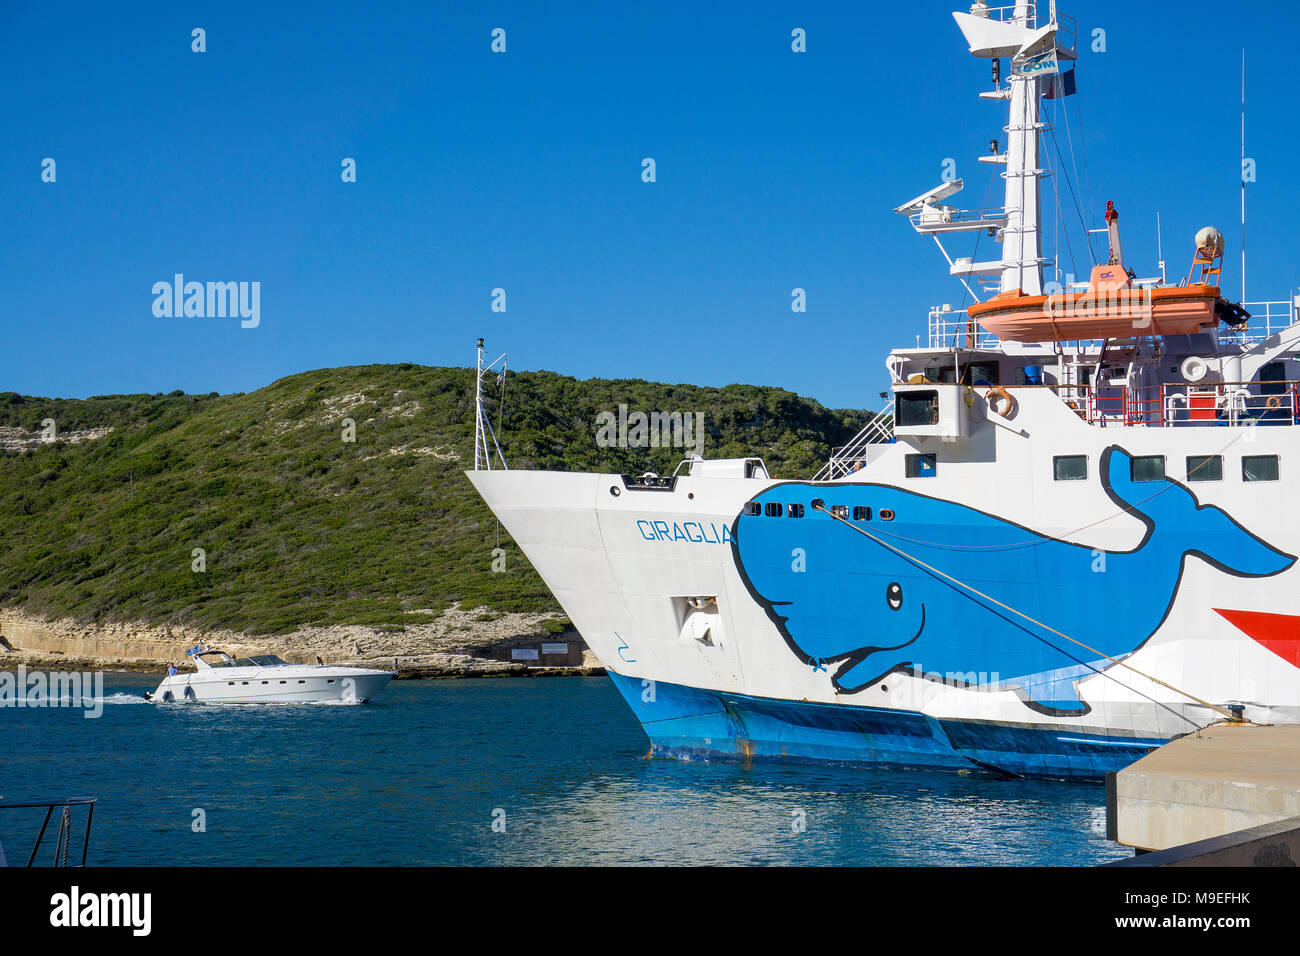 Ferry at fishery and Yacht harbour of Bonifacio, Corsica, France, Mediterranean, Europe Stock Photo